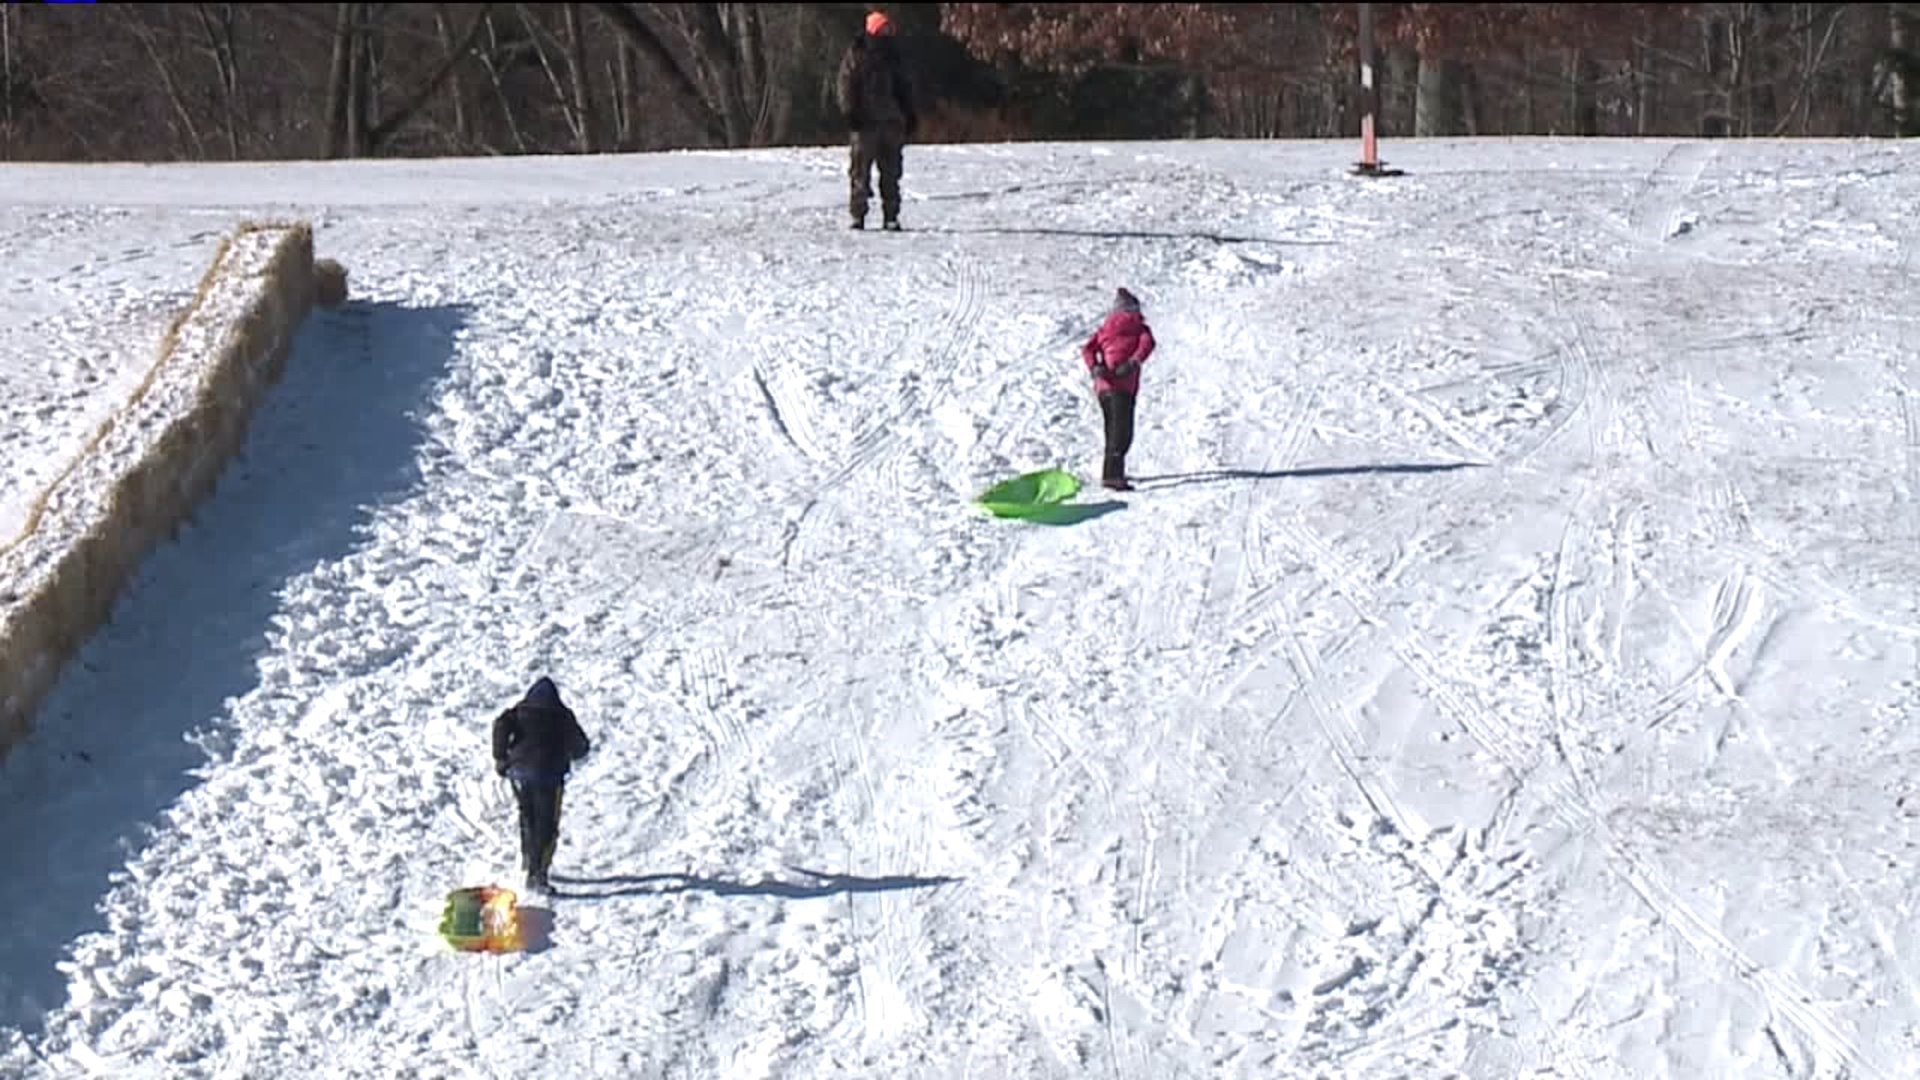 Fun in the Snow at McDade Park